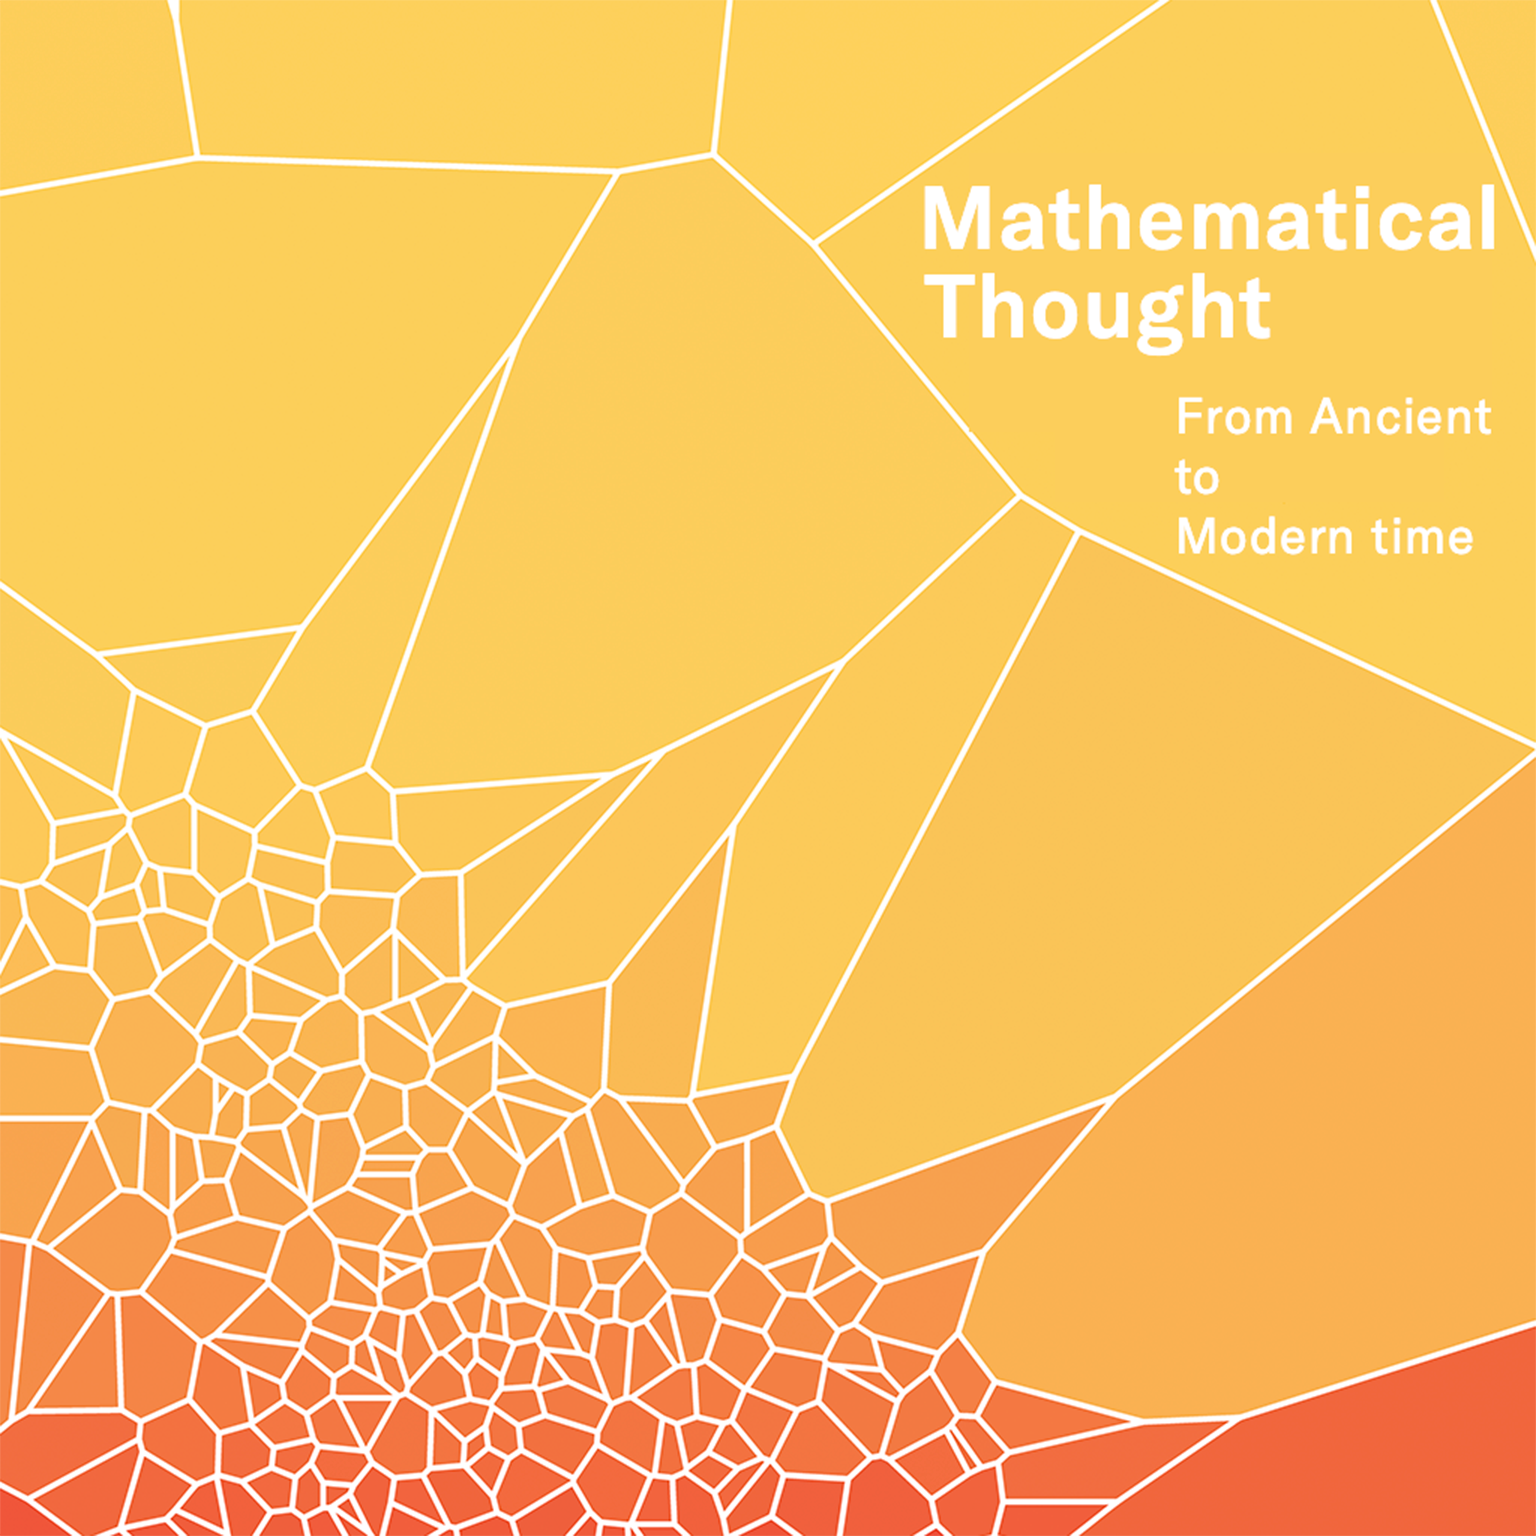 Mathematical Thought From Ancient to Modern time